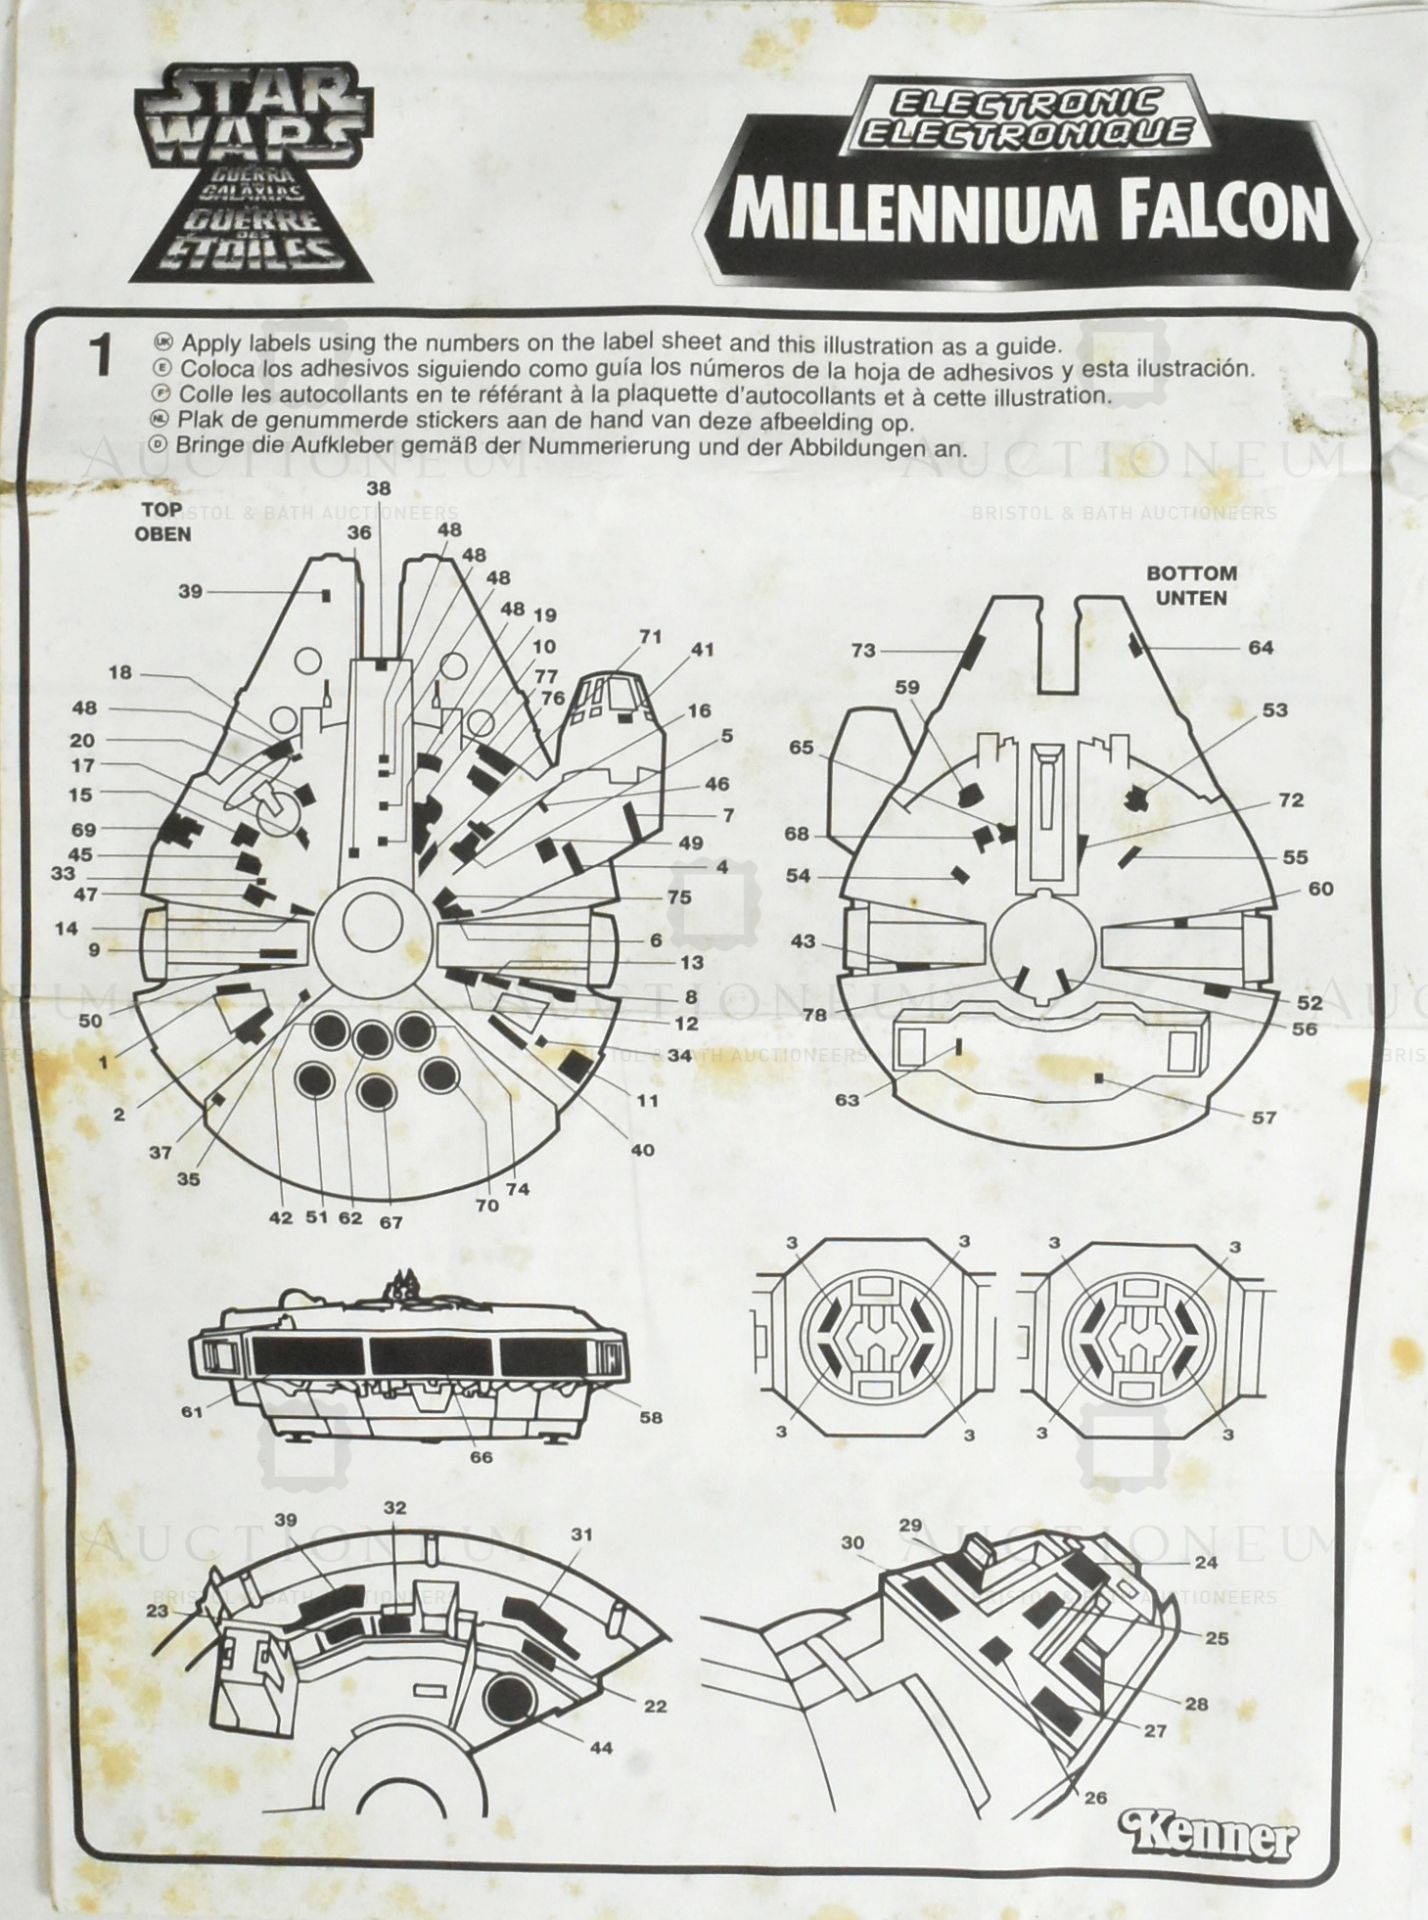 STAR WARS - 1995 KENNER ELECTRONIC MILLENNIUM FALCON - Image 6 of 6